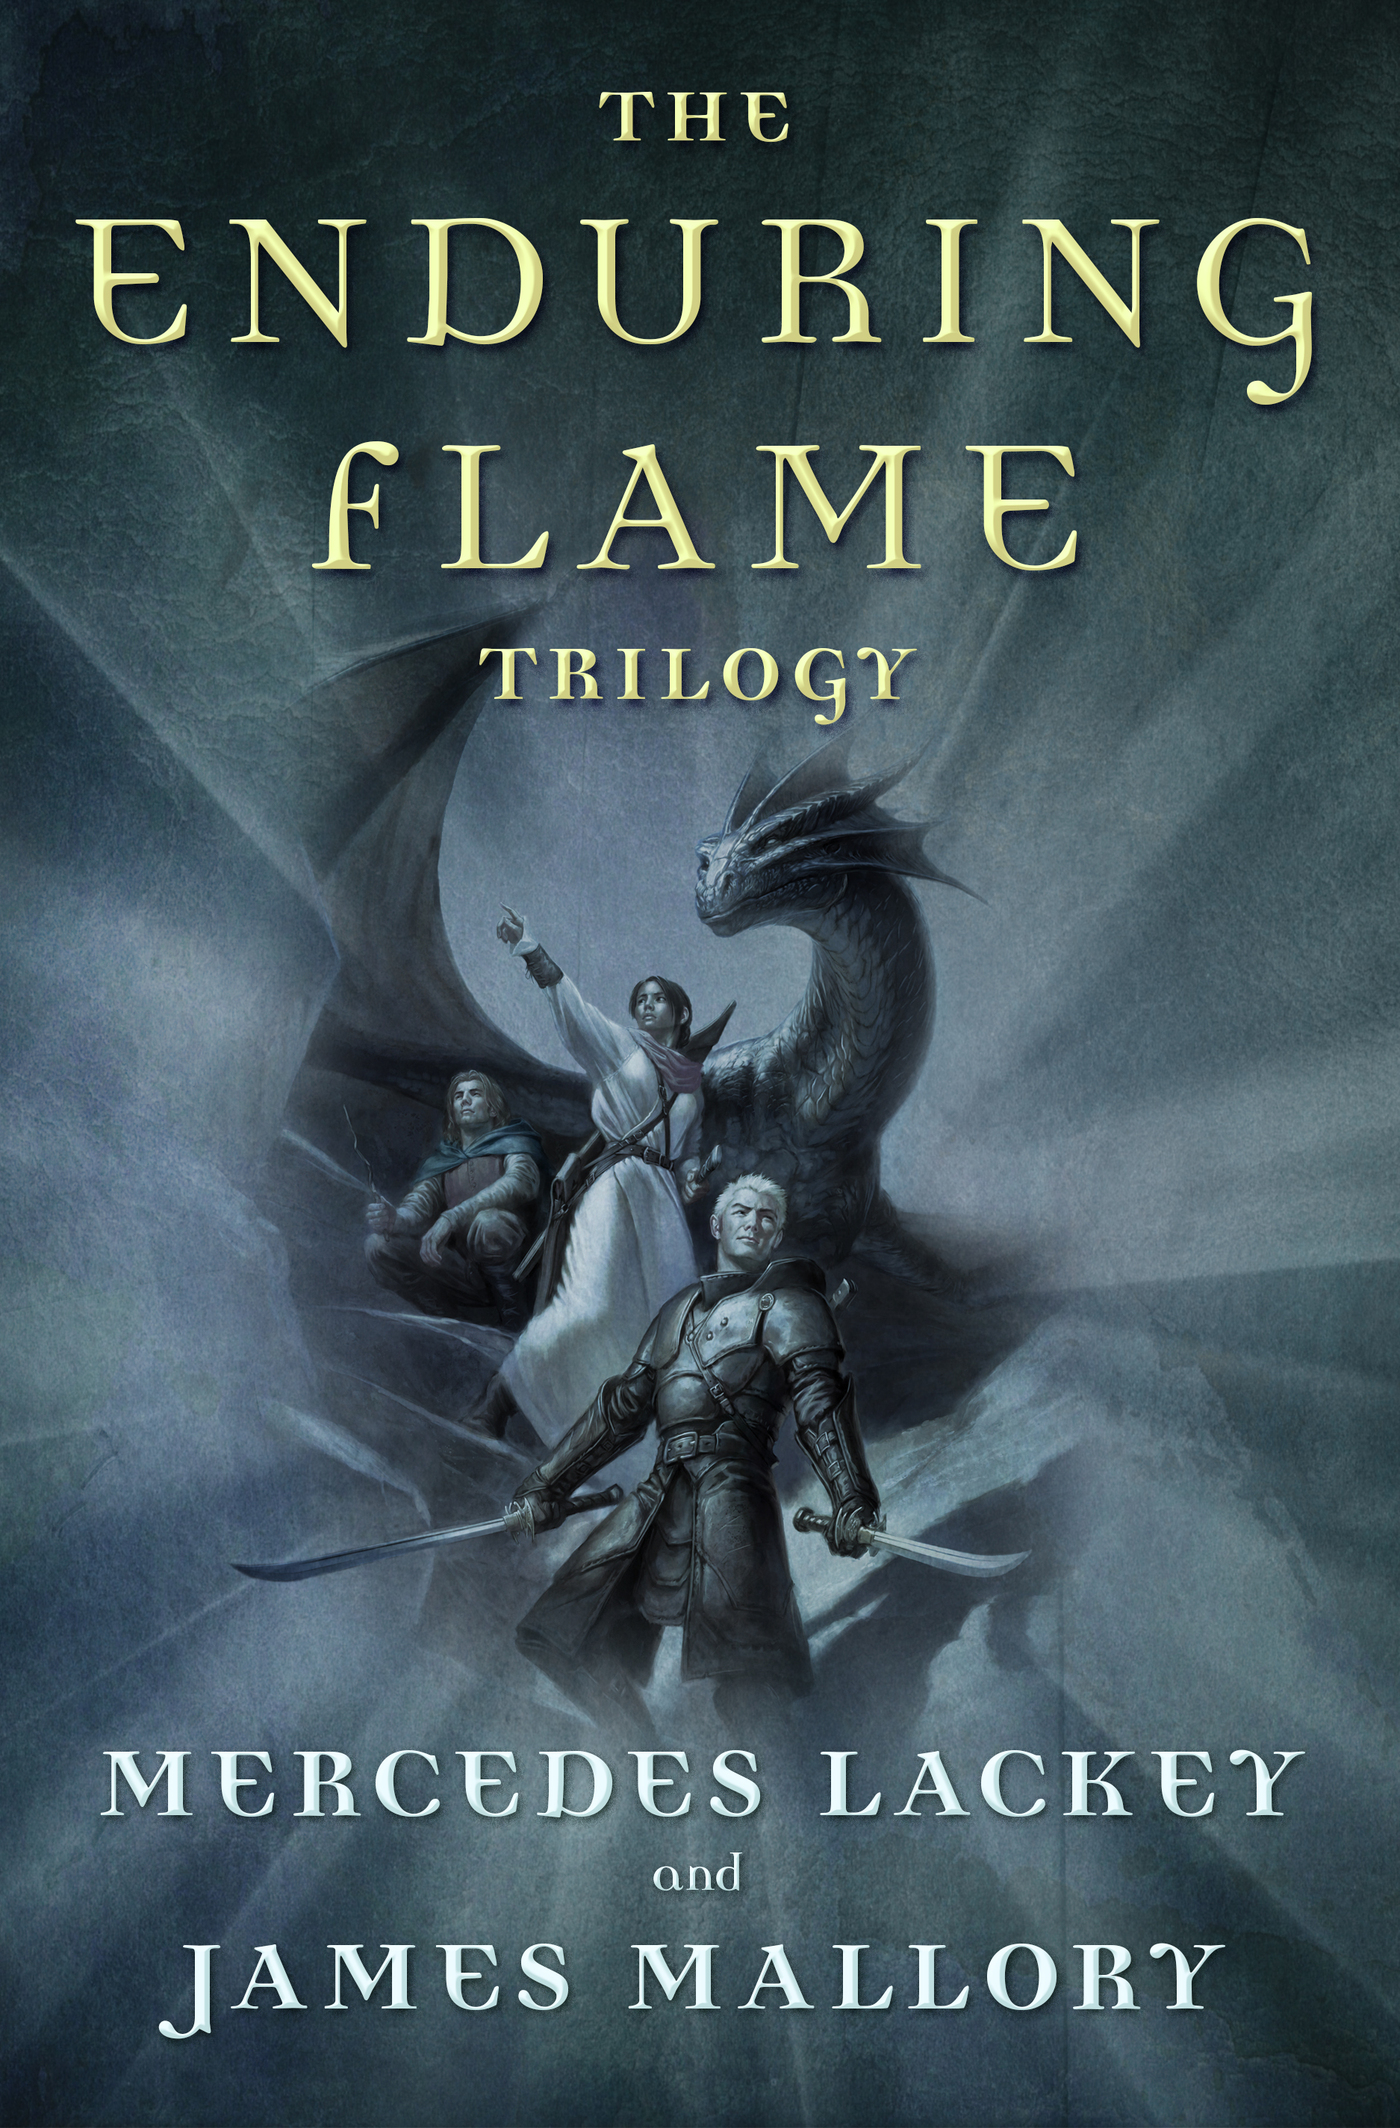 The Enduring Flame Trilogy : The Phoenix Unchained, The Phoenix Endangered, The Phoenix Transformed by Mercedes Lackey, James Mallory